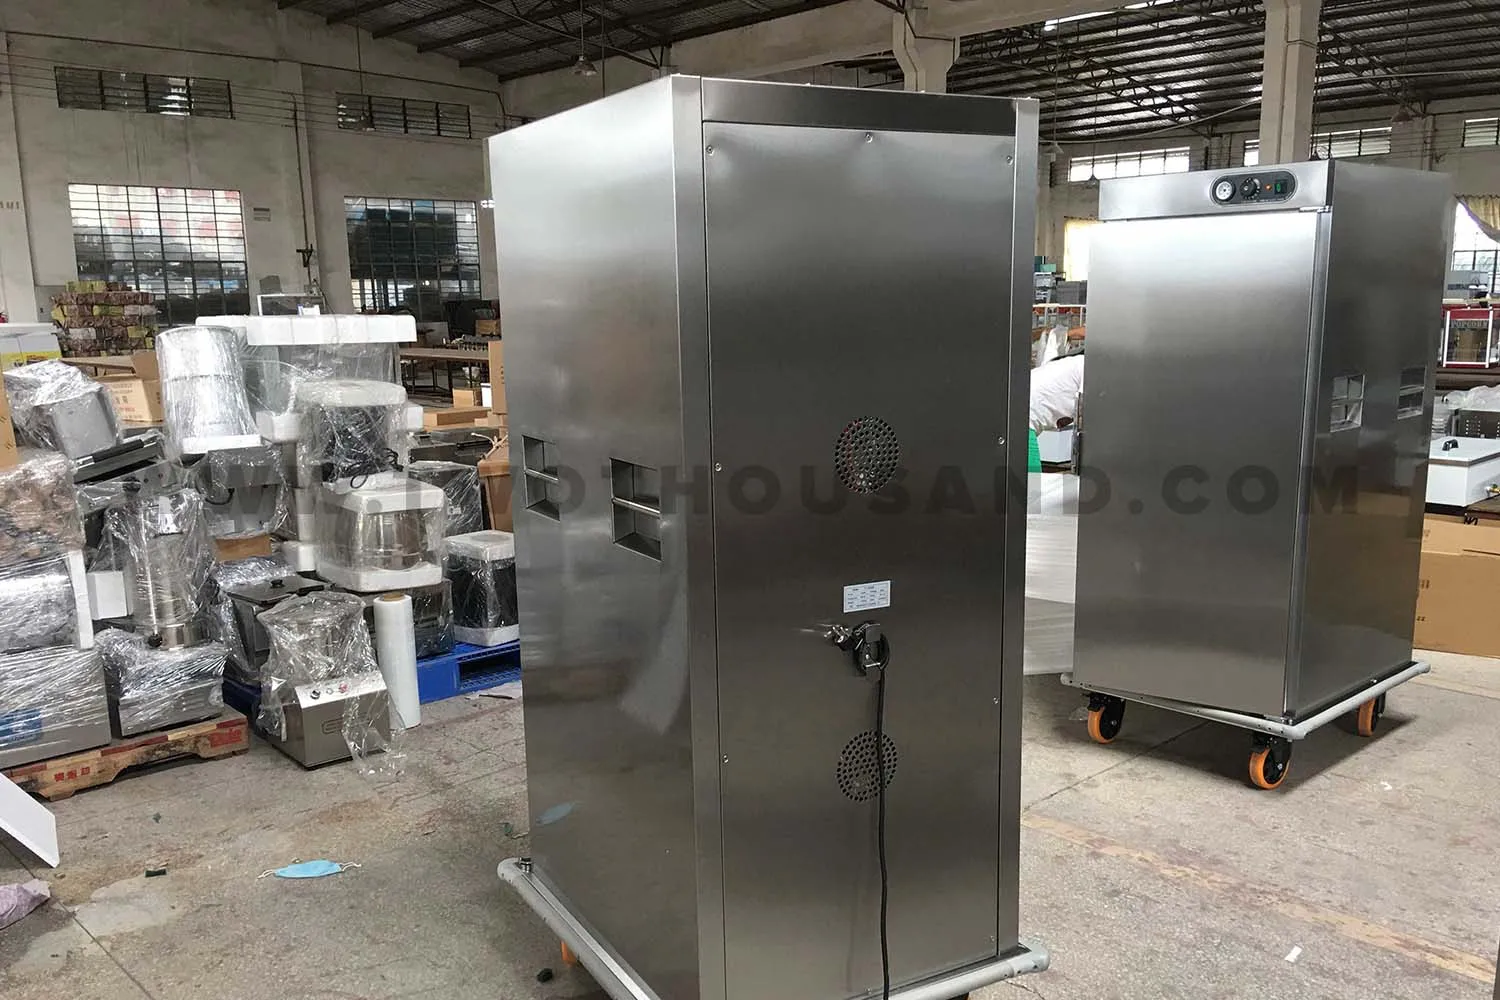 5 Layers 1 Doors Kitchen Electric Commercial Food Warmer Cart TT-K222C  Chinese restaurant equipment manufacturer and wholesaler